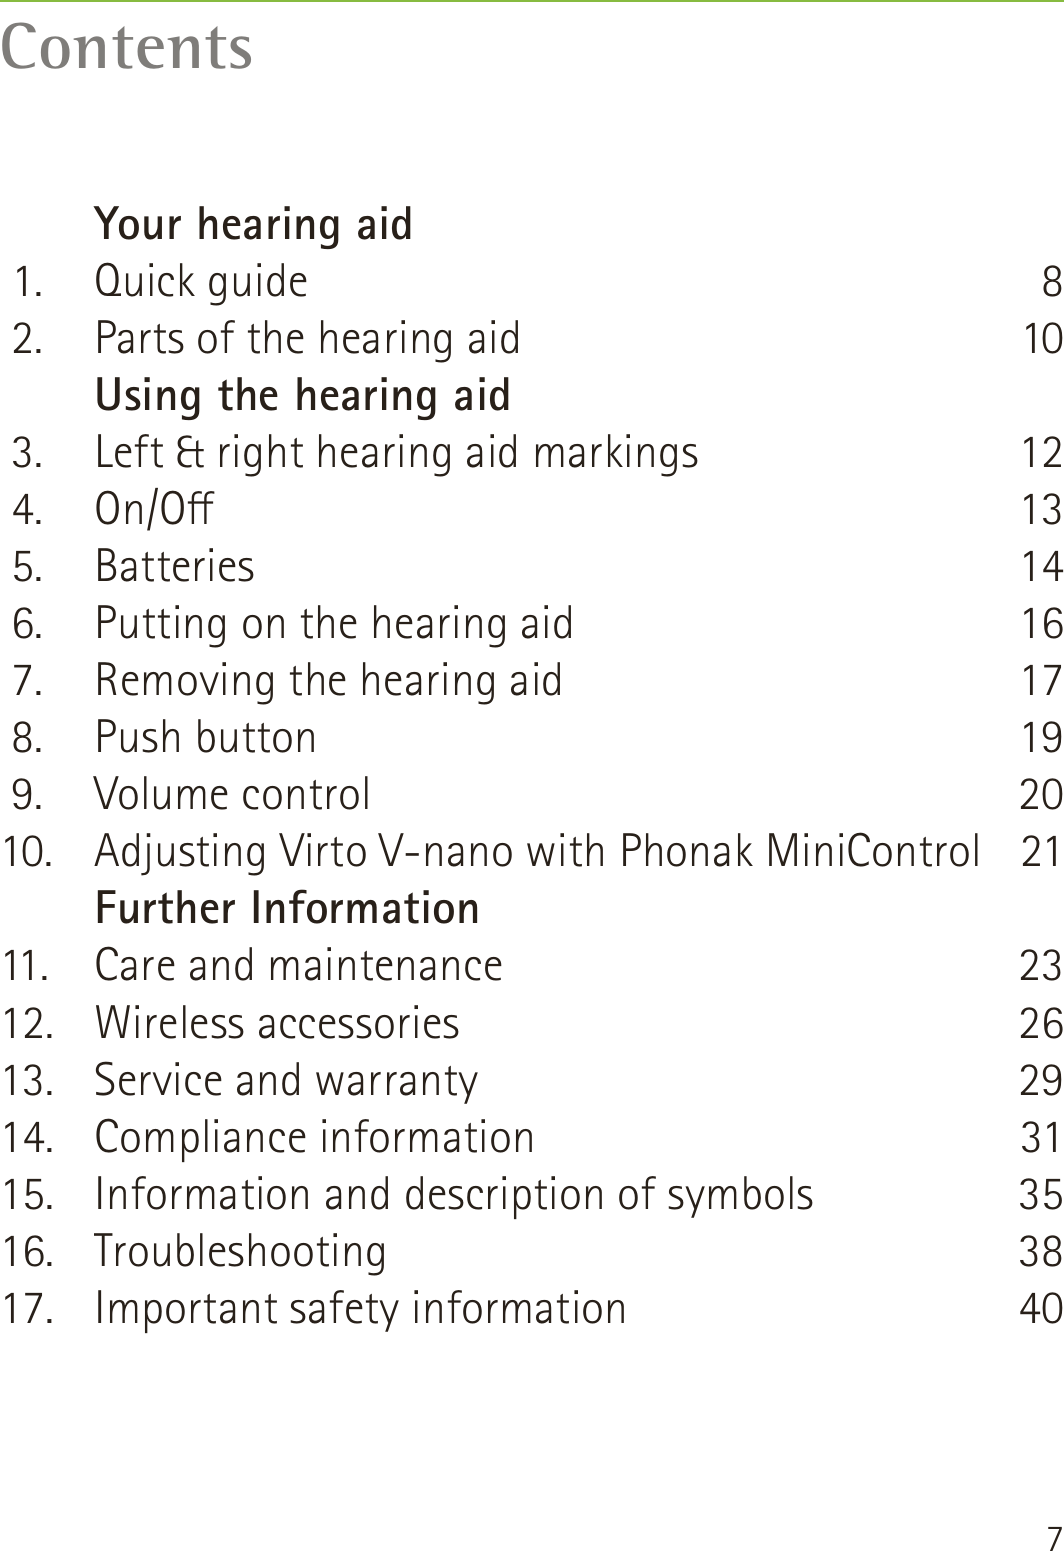 7Contents   Your hearing aid 1.  Quick guide 2.  Parts of the hearing aid   Using the hearing aid 3.  Left &amp; right hearing aid markings 4.  On/O 5.  Batteries 6.  Putting on the hearing aid 7.  Removing the hearing aid 8.  Push button 9.  Volume control10.  Adjusting Virto V-nano with Phonak MiniControl   Further Information11.  Care and maintenance12. Wireless accessories13.  Service and warranty14. Compliance information15.  Information and description of symbols 16. Troubleshooting17.  Important safety information810121314161719202123262931353840